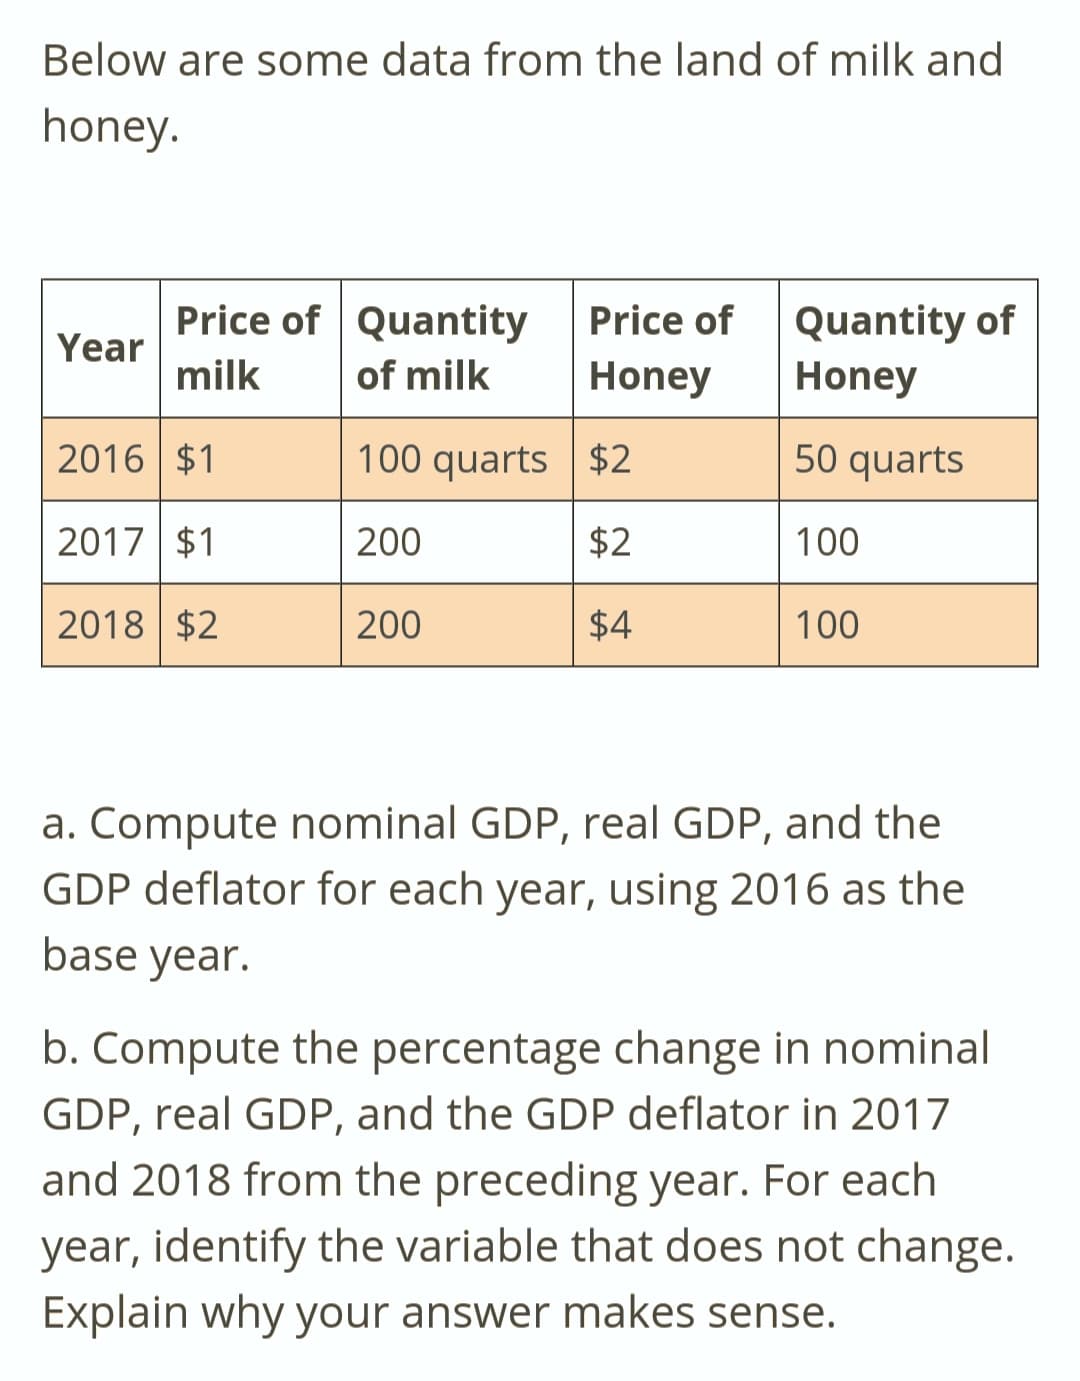 Below are some data from the land of milk and
honey.
Price of Quantity Price of
Year
Quantity of
Honey
milk
of milk
Honey
2016 $1
100 quarts
$2
50 quarts
2017 $1
200
$2
100
2018 $2
200
$4
100
a. Compute nominal GDP, real GDP, and the
GDP deflator for each year, using 2016 as the
base year.
b. Compute the percentage change in nominal
GDP, real GDP, and the GDP deflator in 2017
and 2018 from the preceding year. For each
year, identify the variable that does not change.
Explain why your answer makes sense.